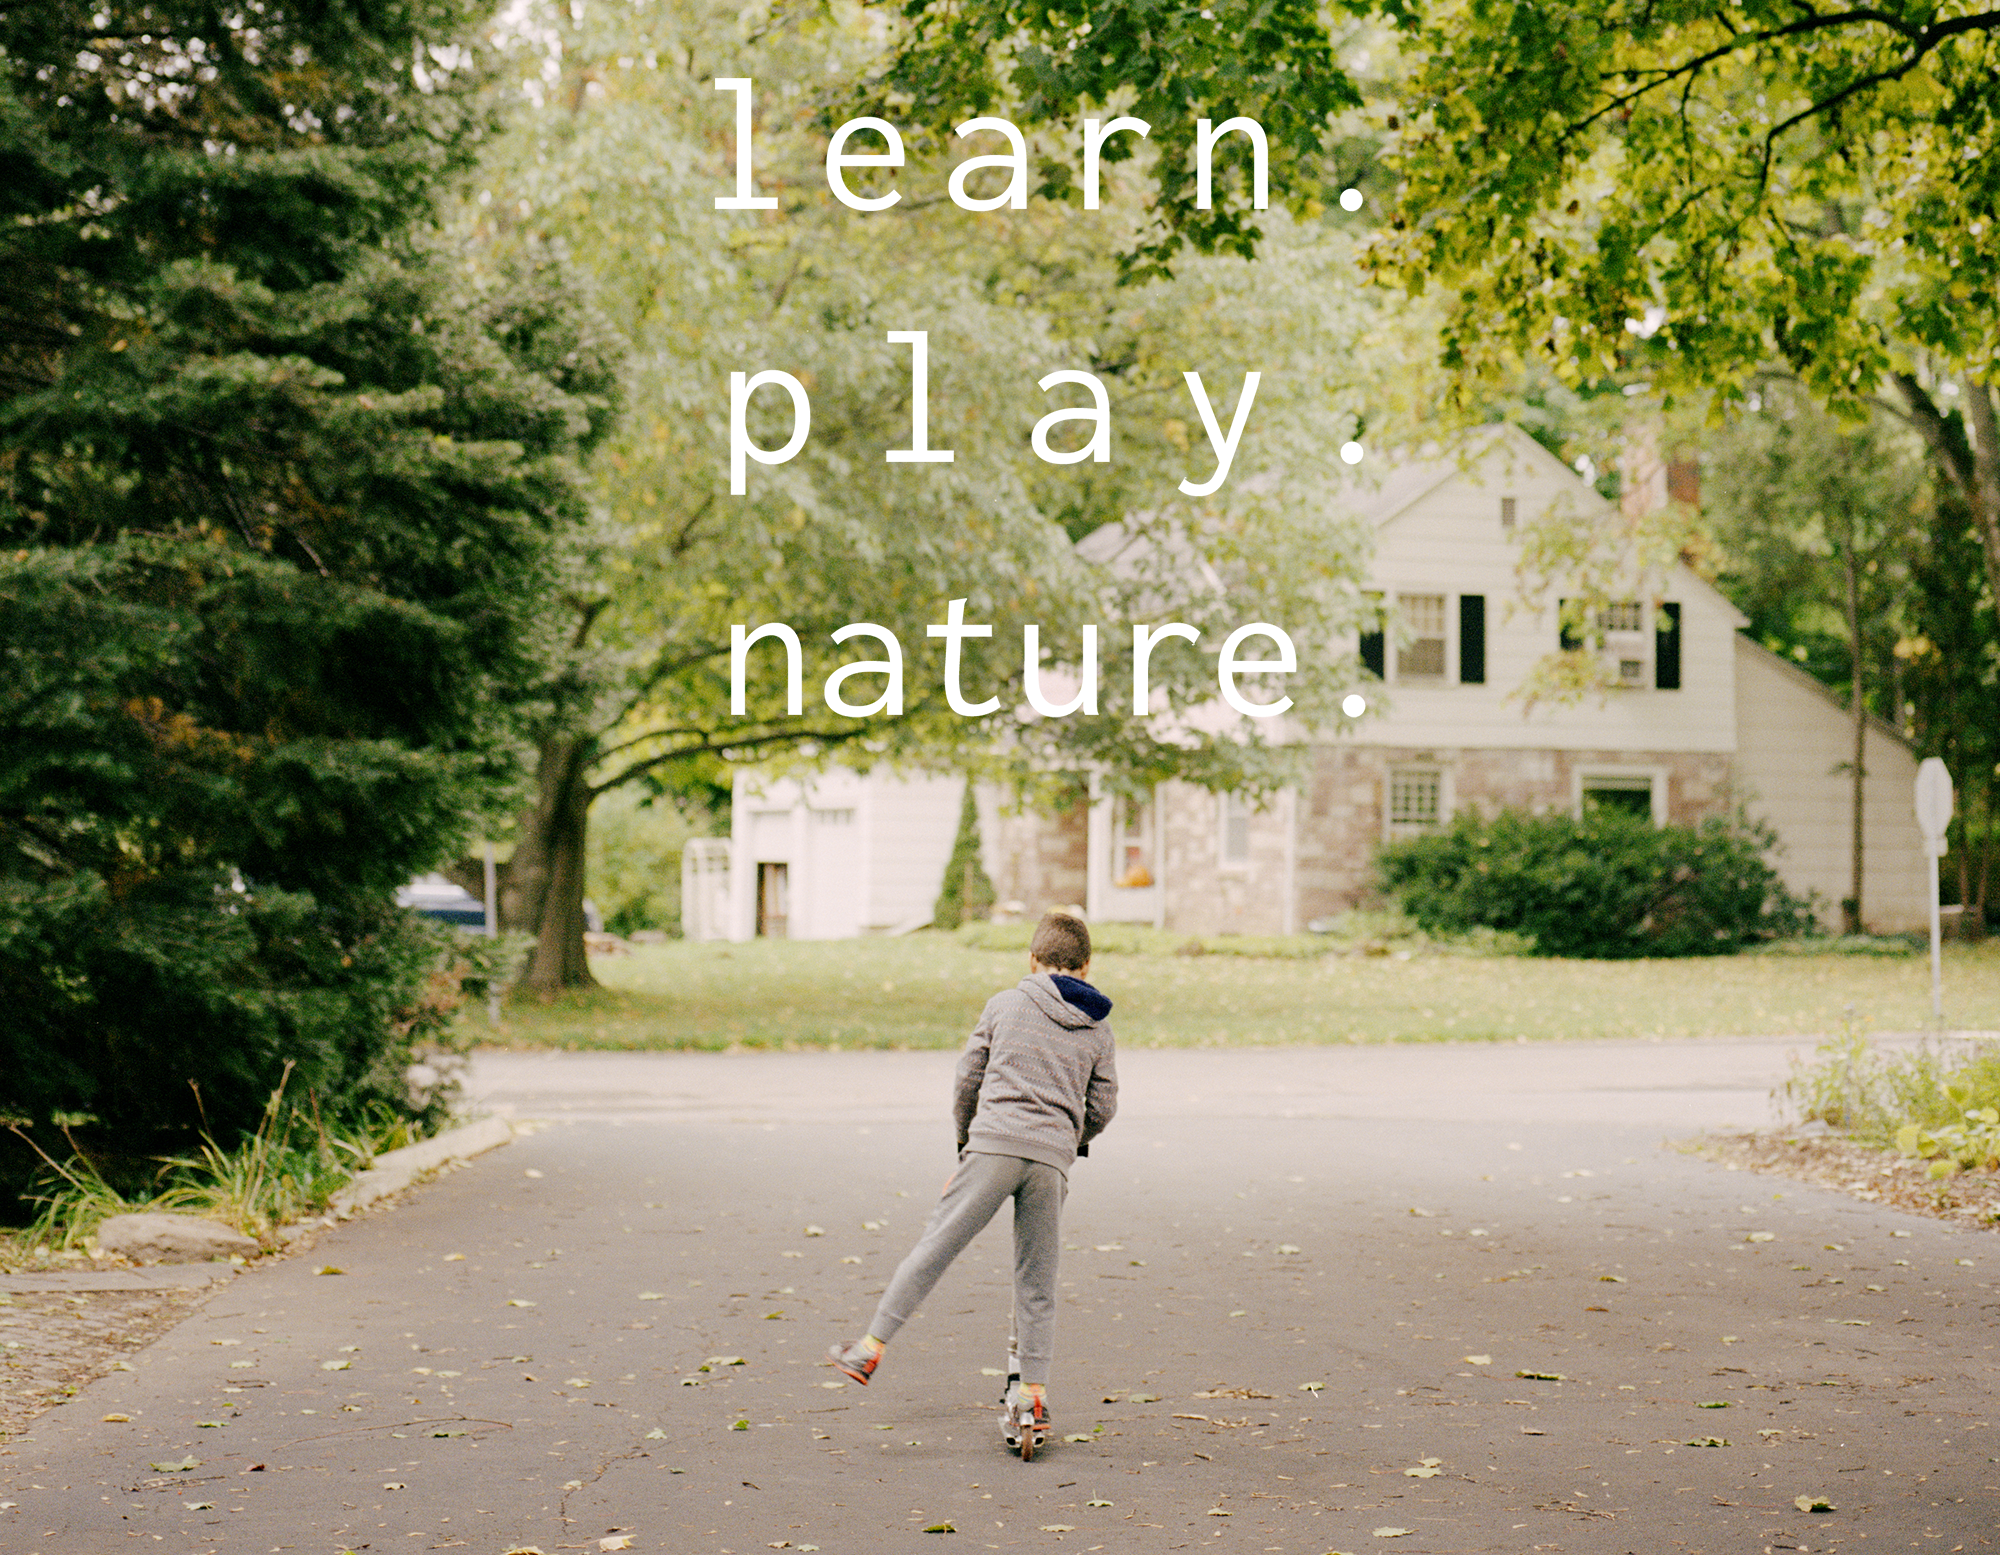 learn. play. nature.